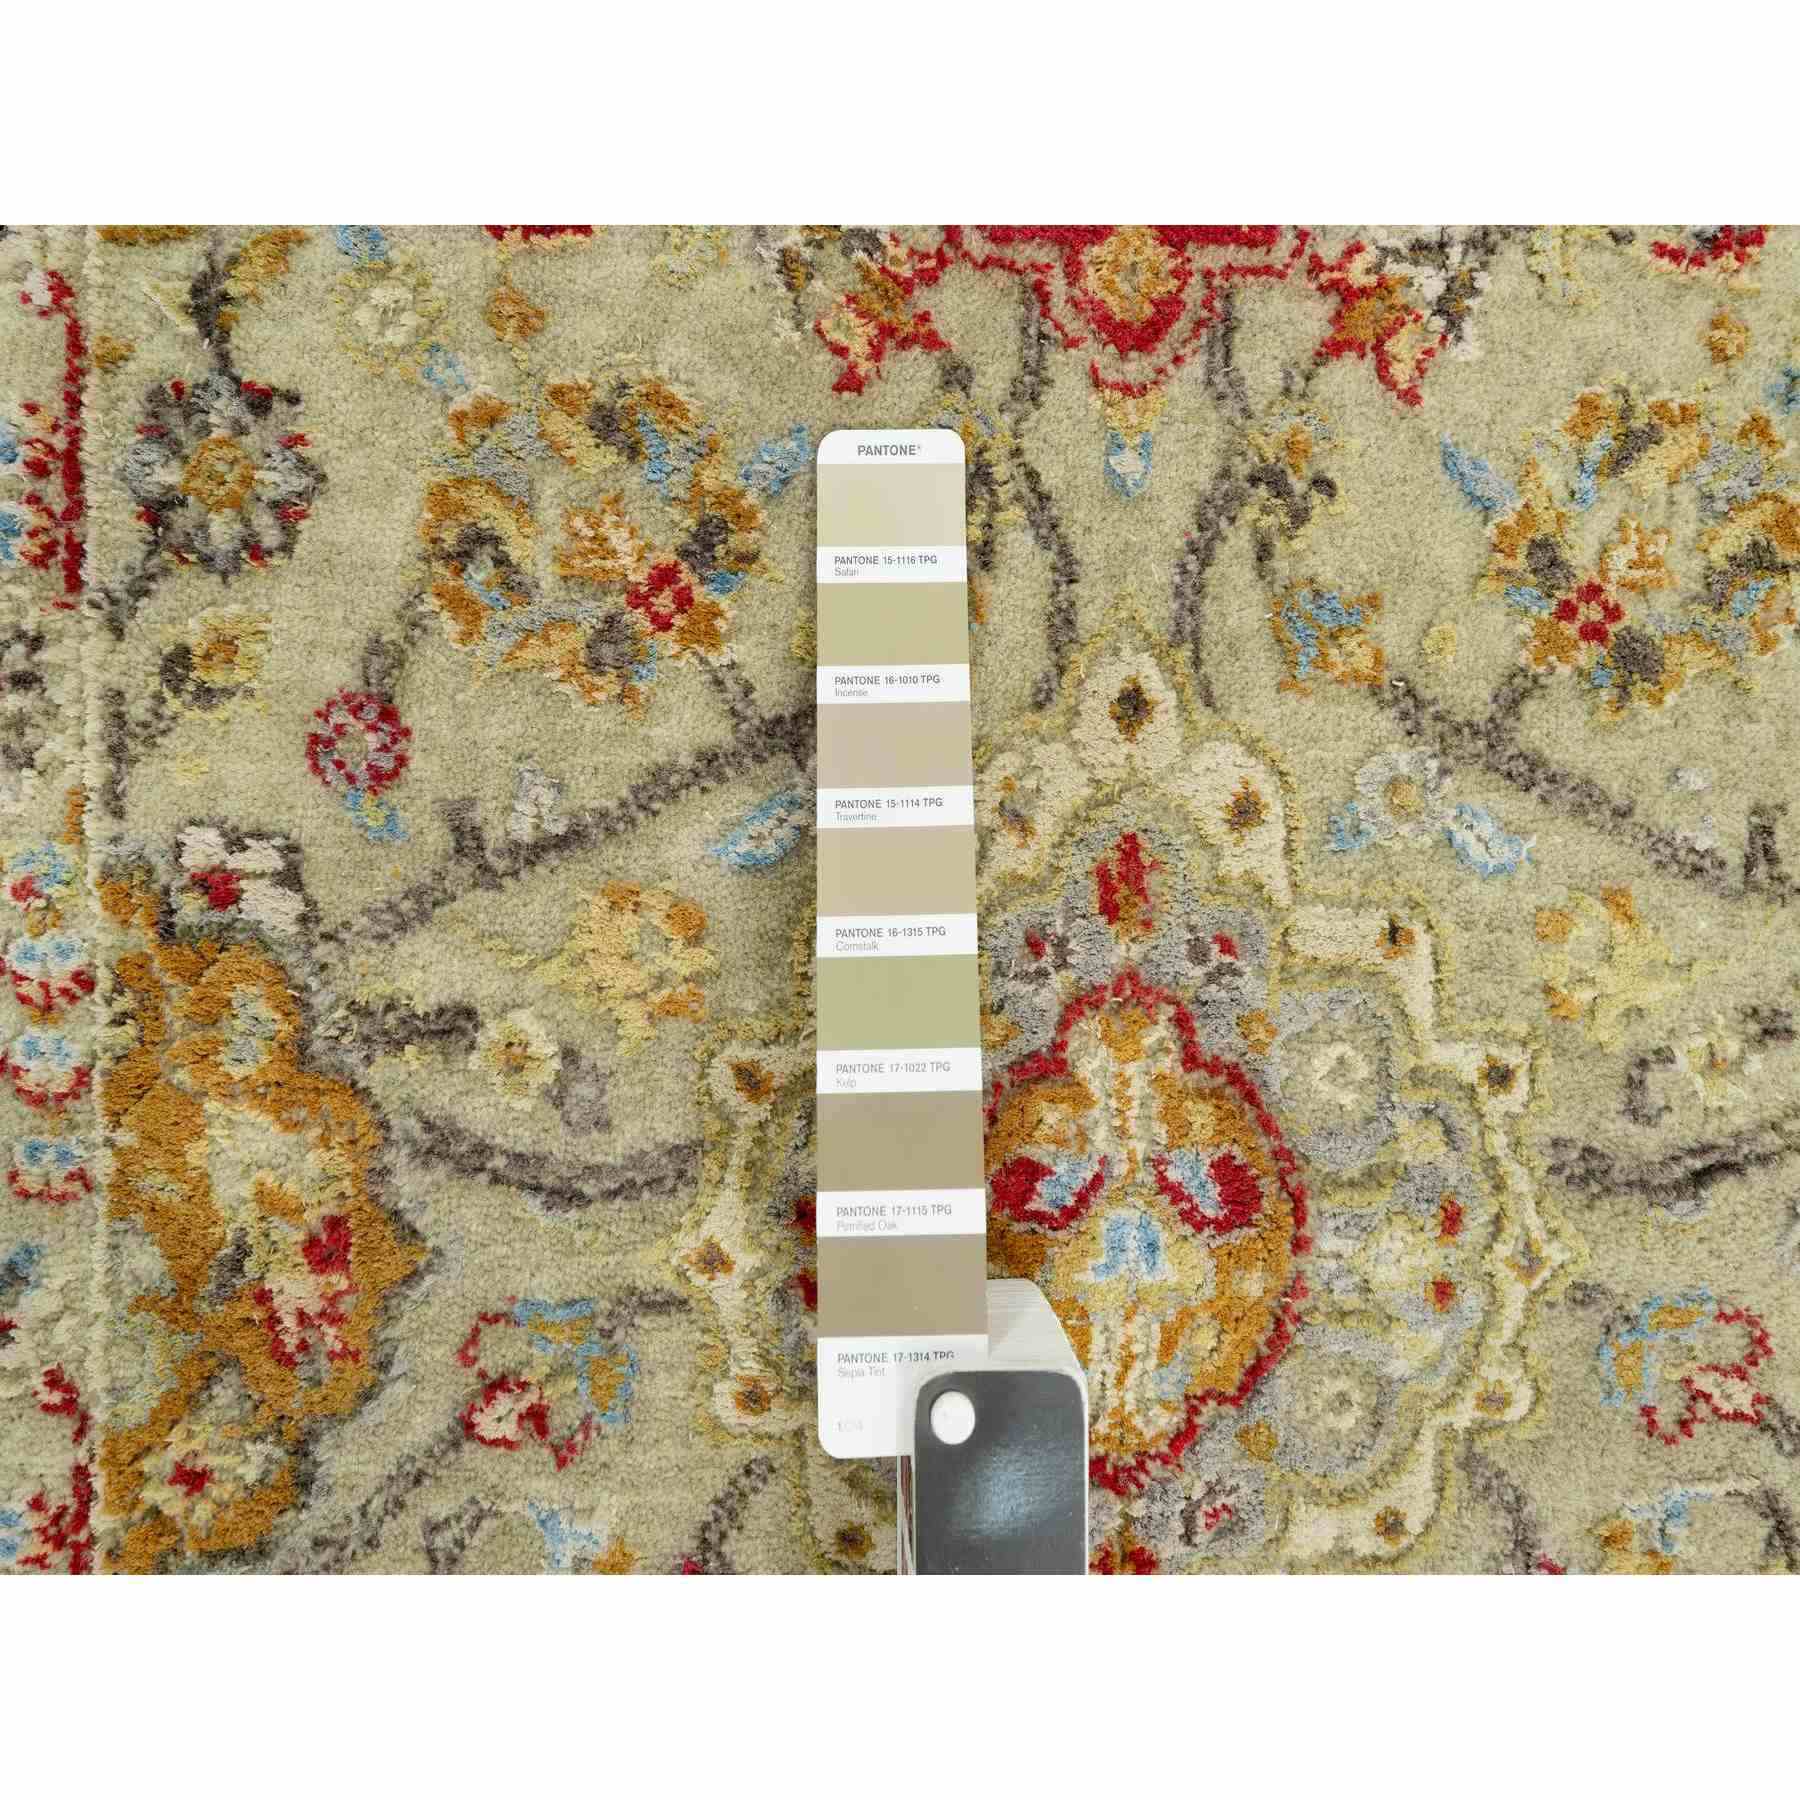 Transitional-Hand-Knotted-Rug-452655